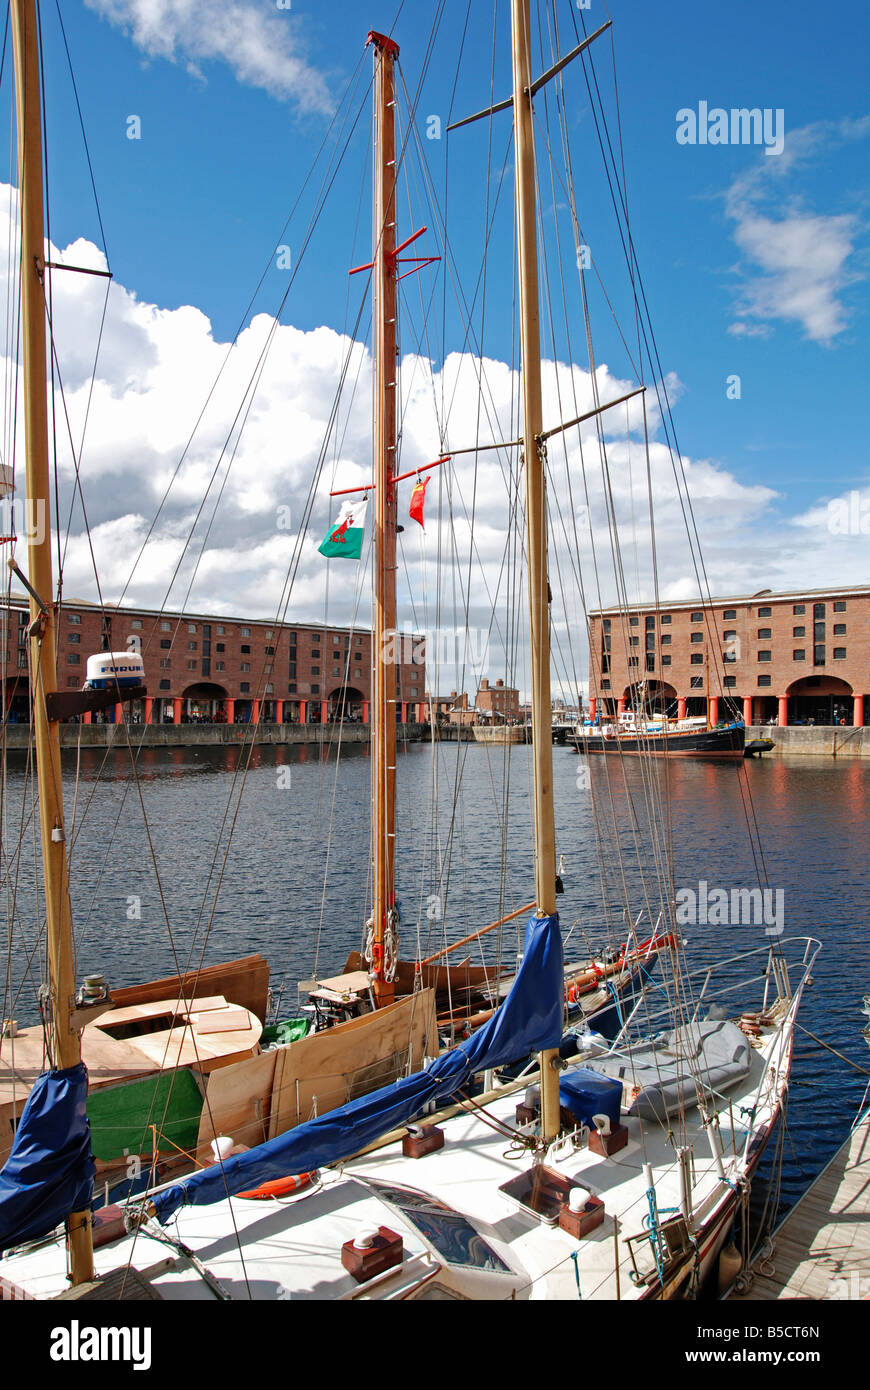 yachts moored at albert dock in liverpool,england,uk Stock Photo